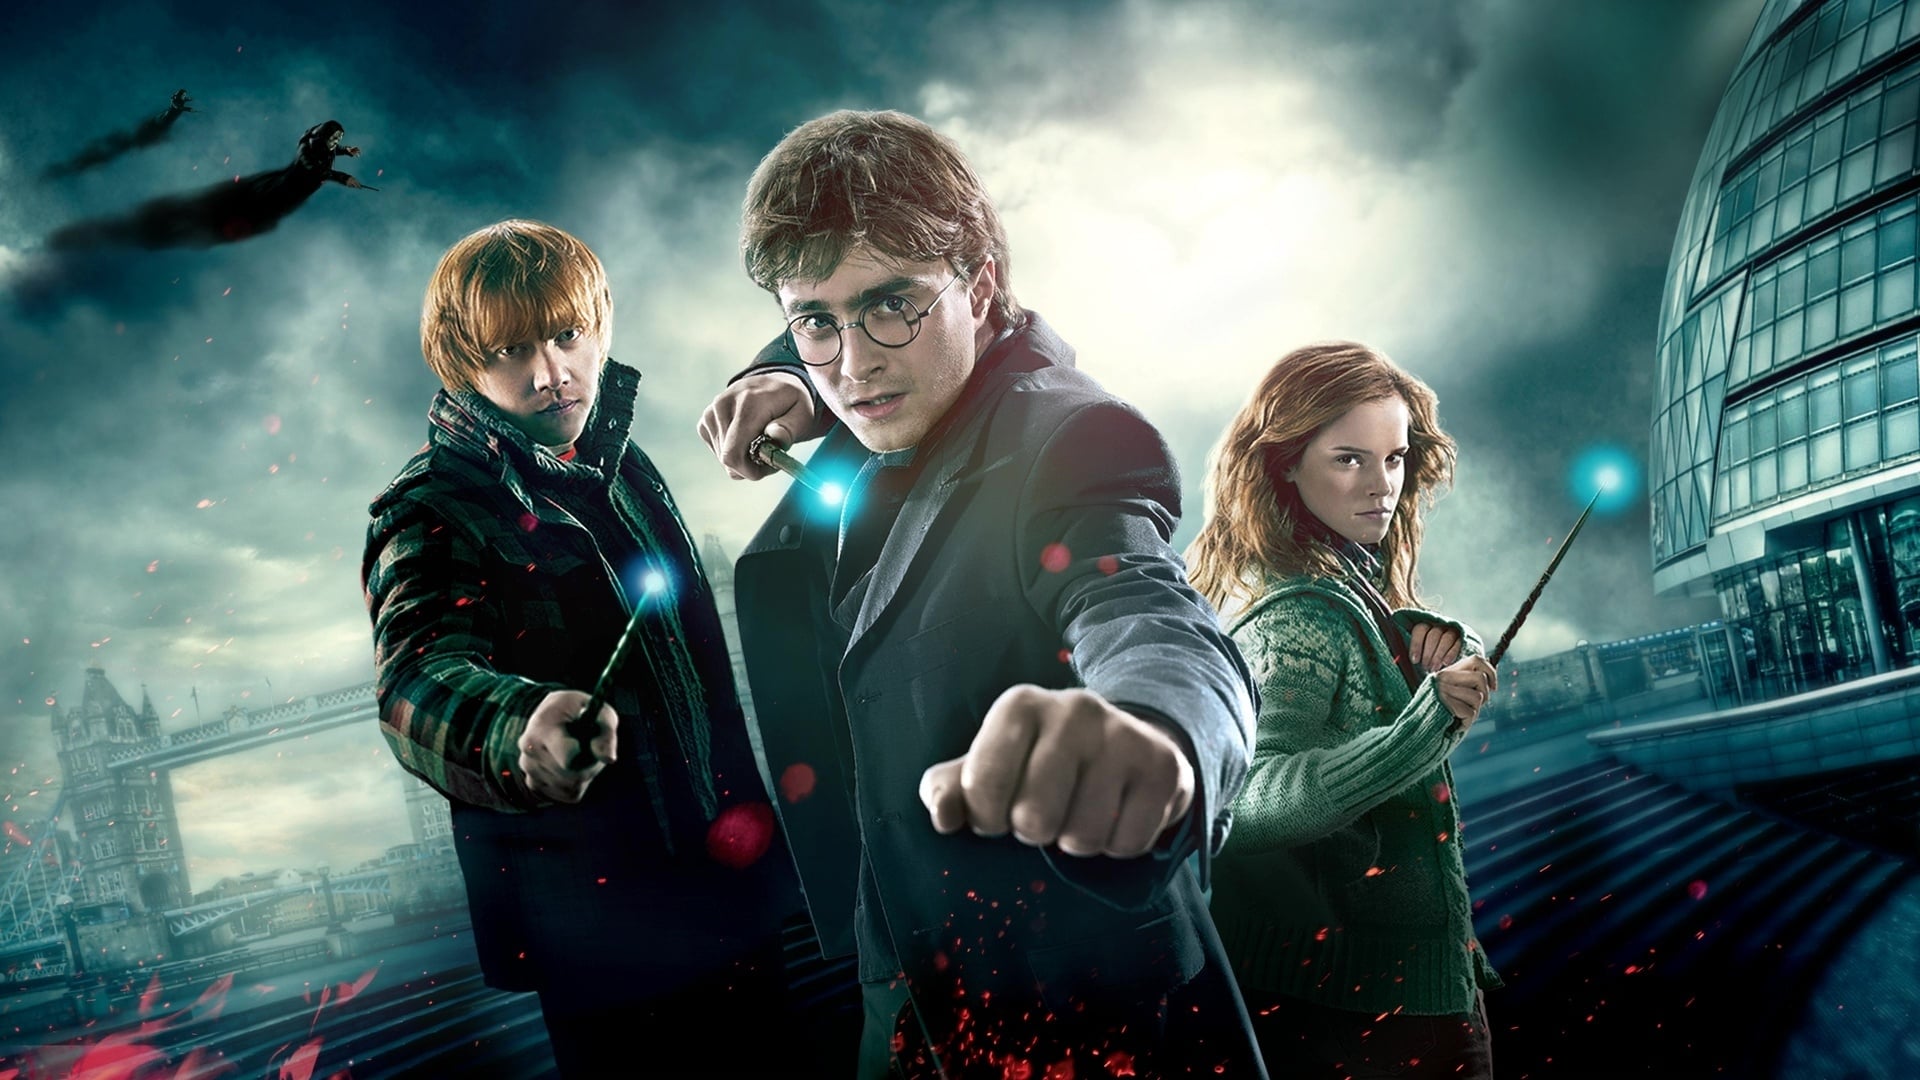 Free Download Harry Potter 7 Wallpaper HD.  Harry potter iphone wallpaper,  Deathly hallows wallpaper, Harry potter background